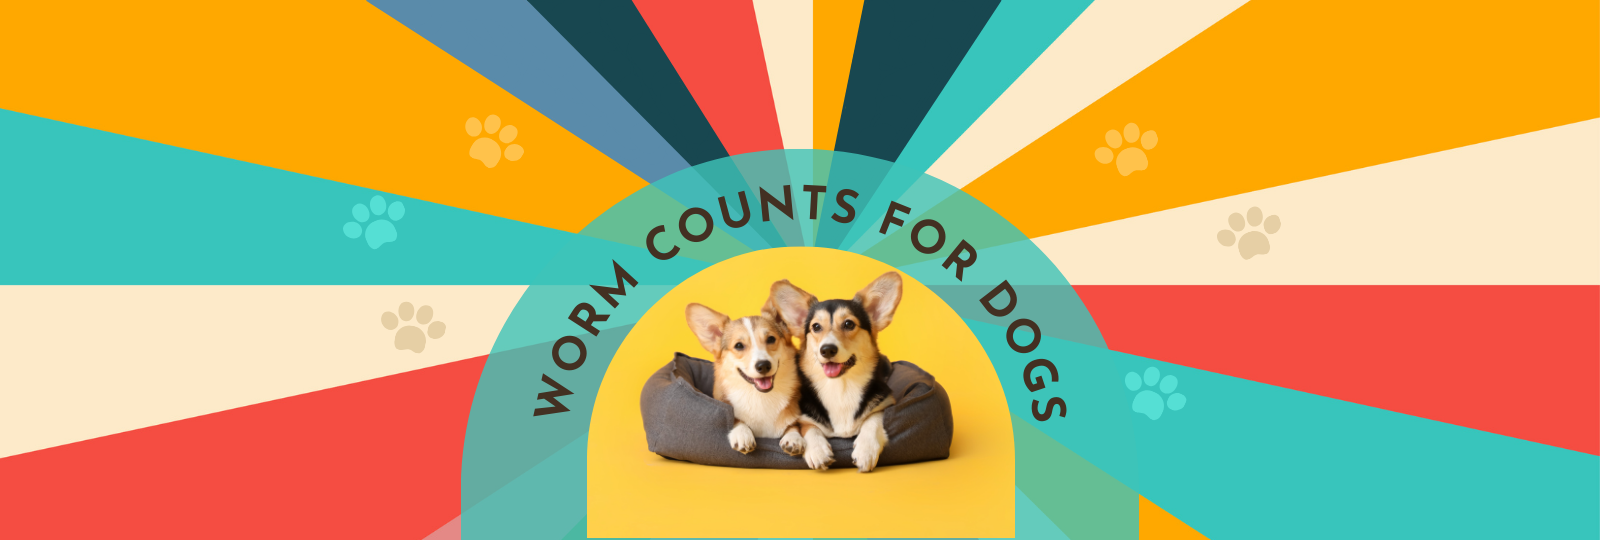 Worm Counts for Dogs banner image